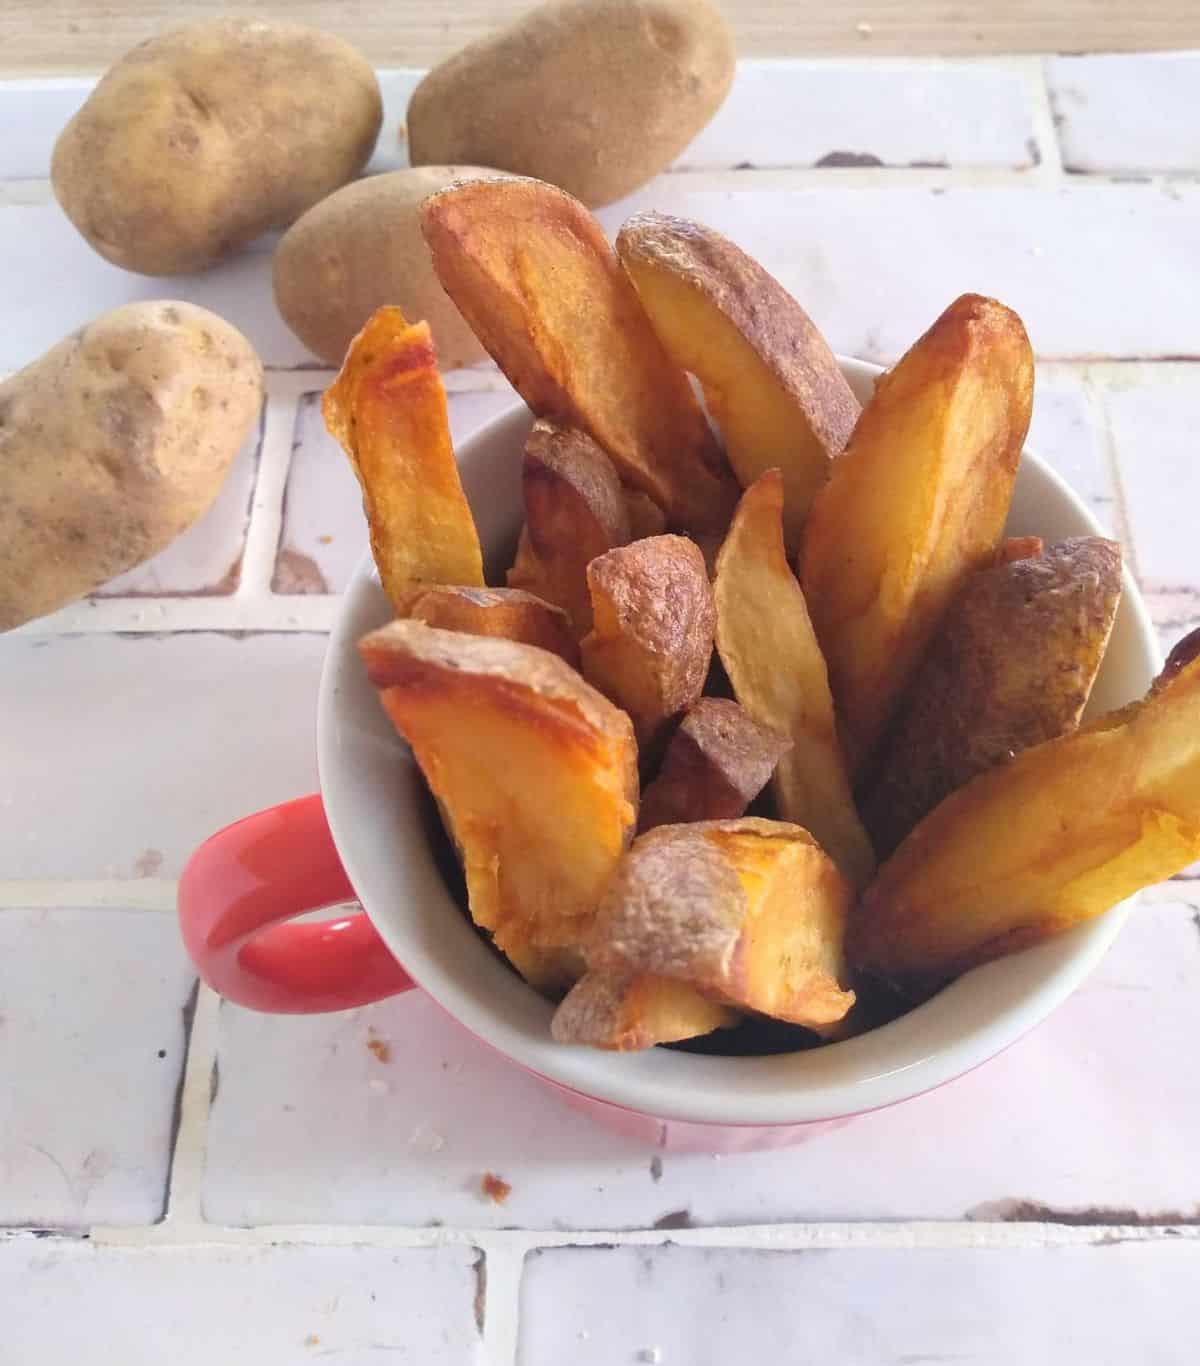 Baked potato fries in a red mug sitting on a white tile countertop with Russet potatoes in the top left corner.